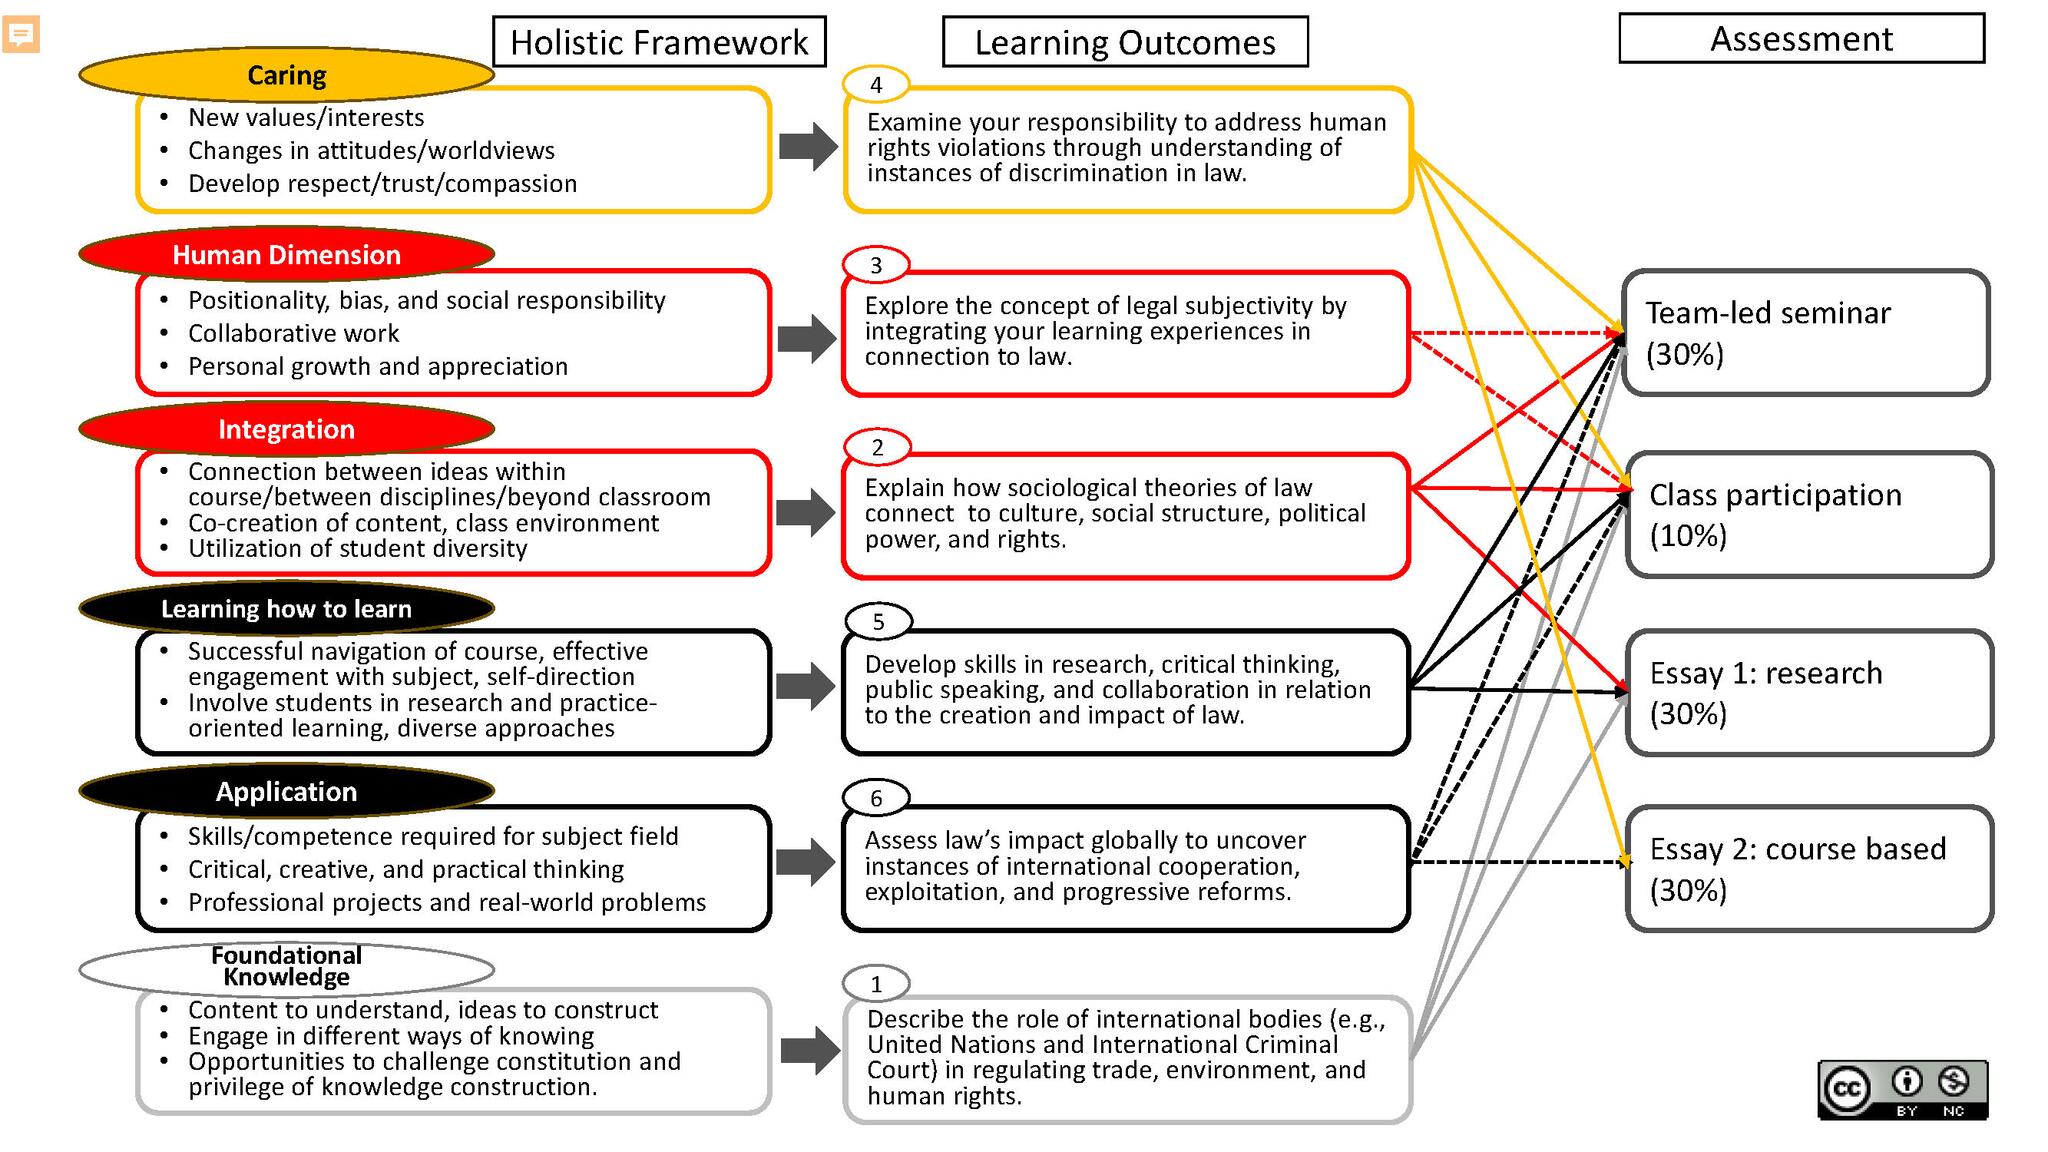 Visualization of Approach to wholistic framework